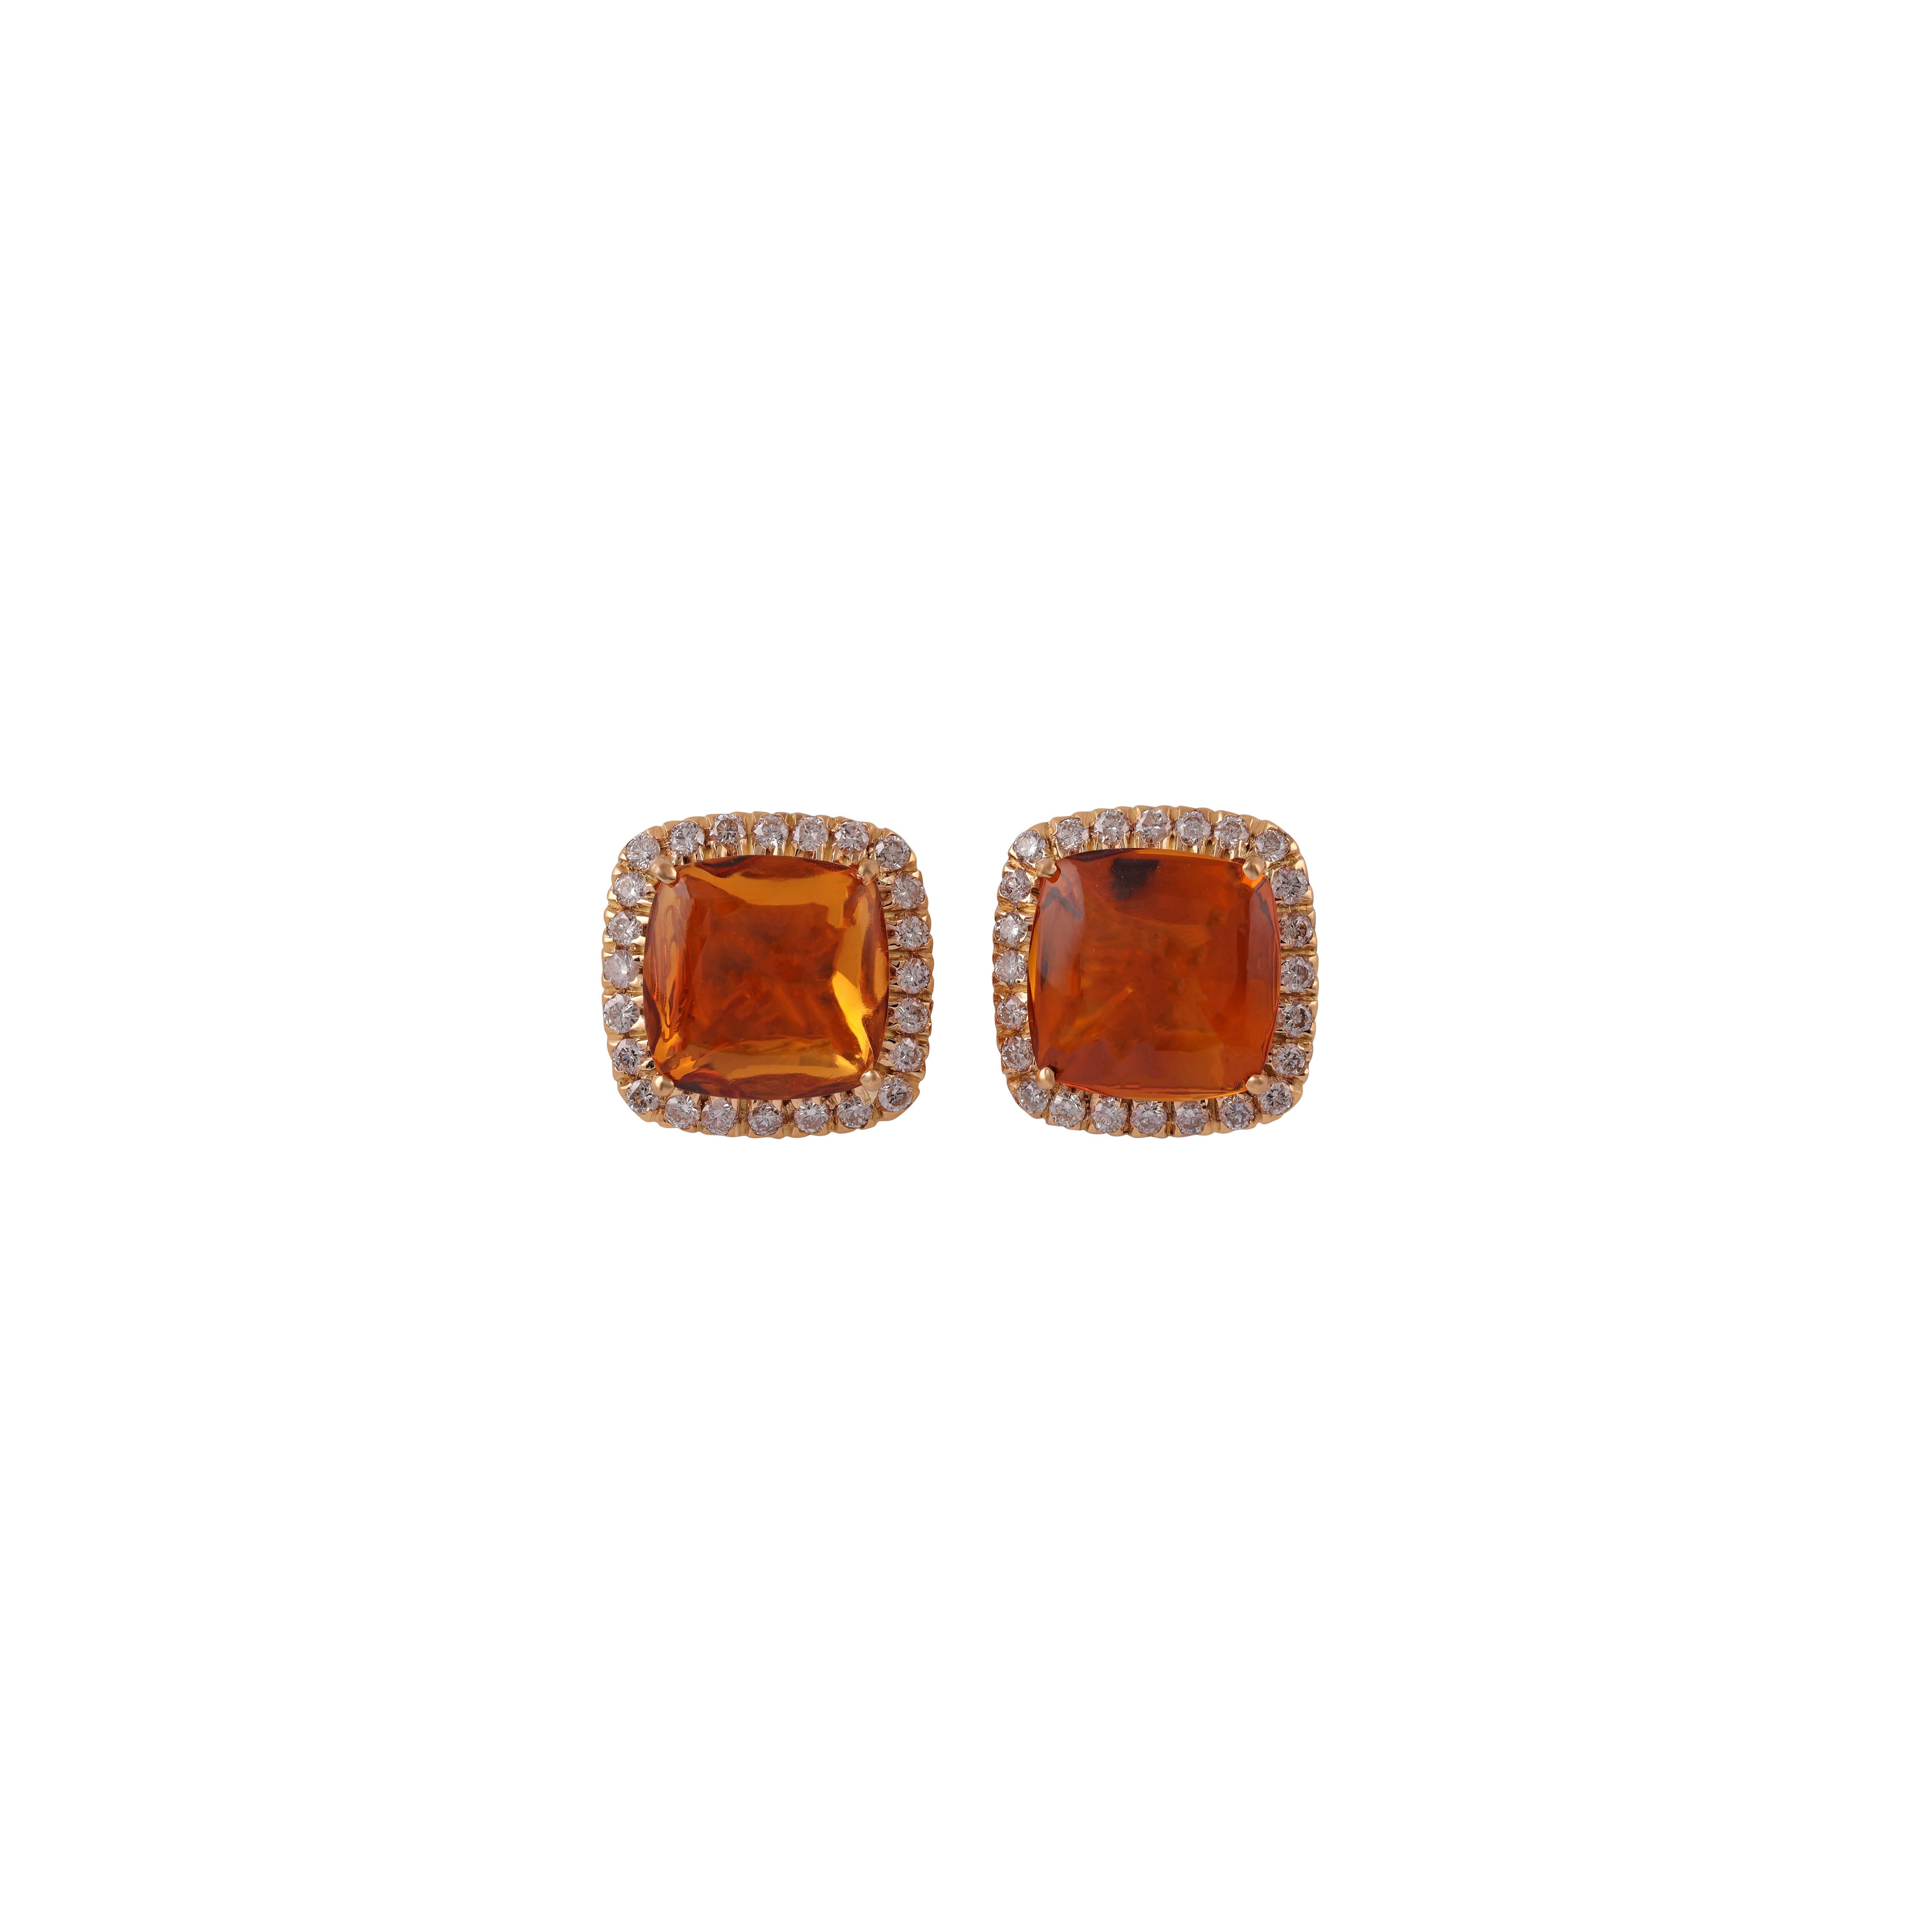 Classic and simple chic stud earrings, totally handmade in 18 kt yellow gold setting with 4 prongs a nice and clean Citrine & Diamond 
Gold - 5.27gm
Citrine - 12.34 Carat
Diamond - 0.85 Carat 
